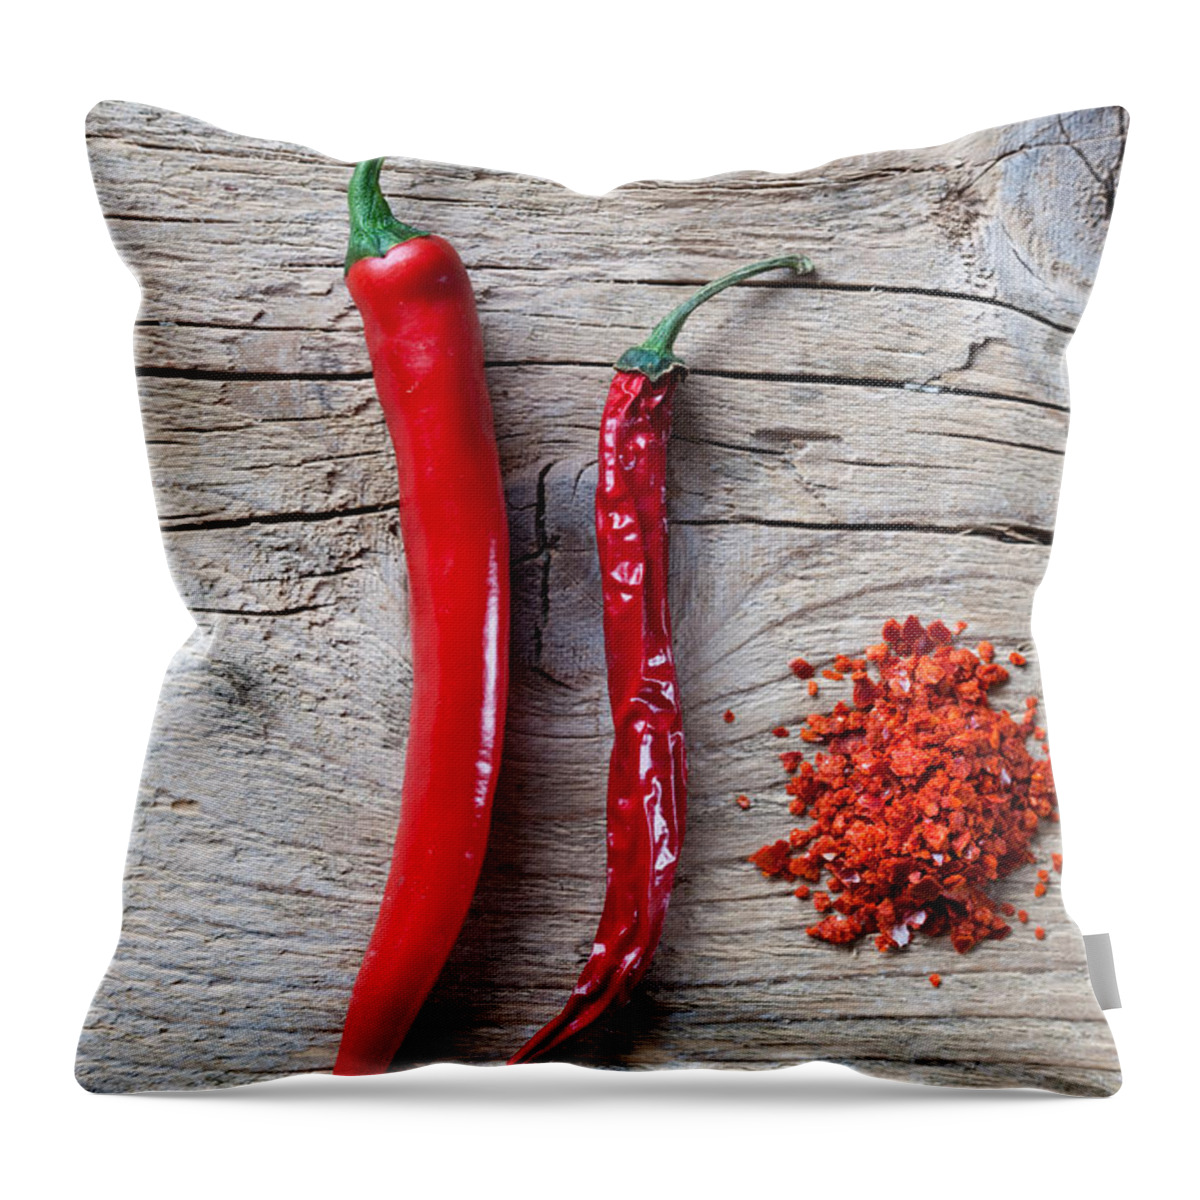 Chili Throw Pillow featuring the photograph Red Chili Pepper #1 by Nailia Schwarz